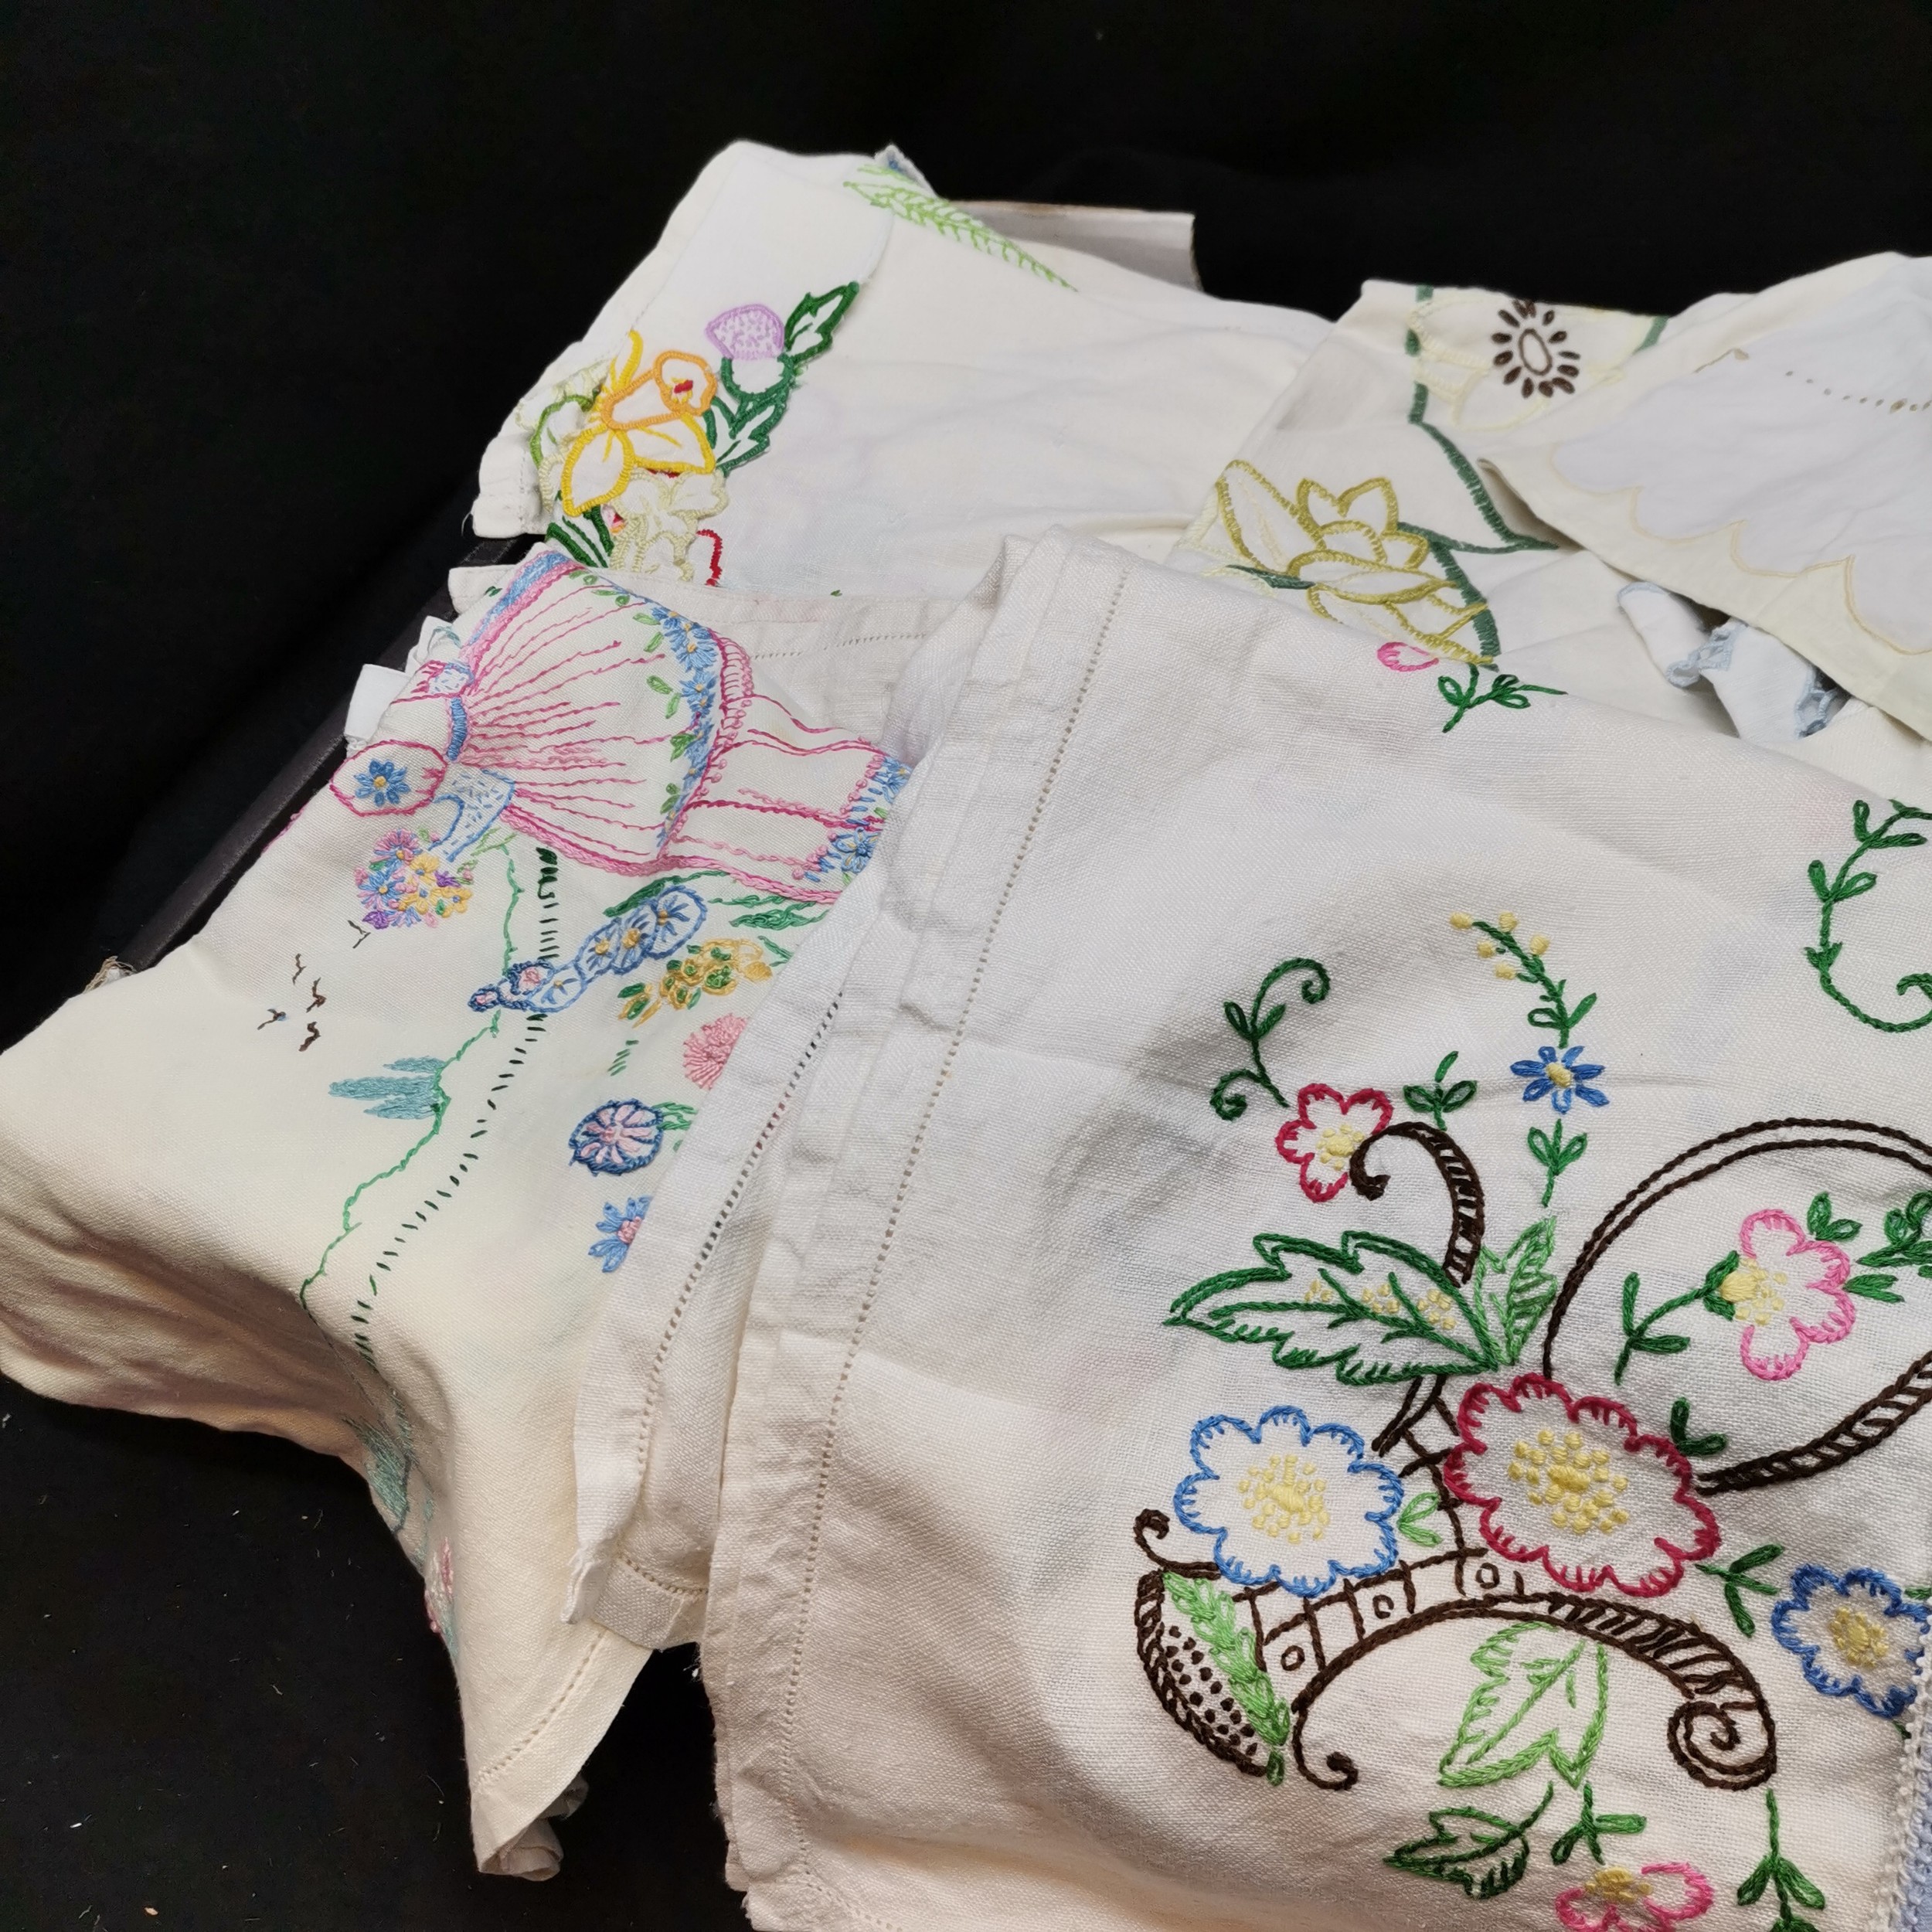 Lot of coloured linen, tablecloths, runners, etc - all in used condition - most with embroidery - Image 4 of 4